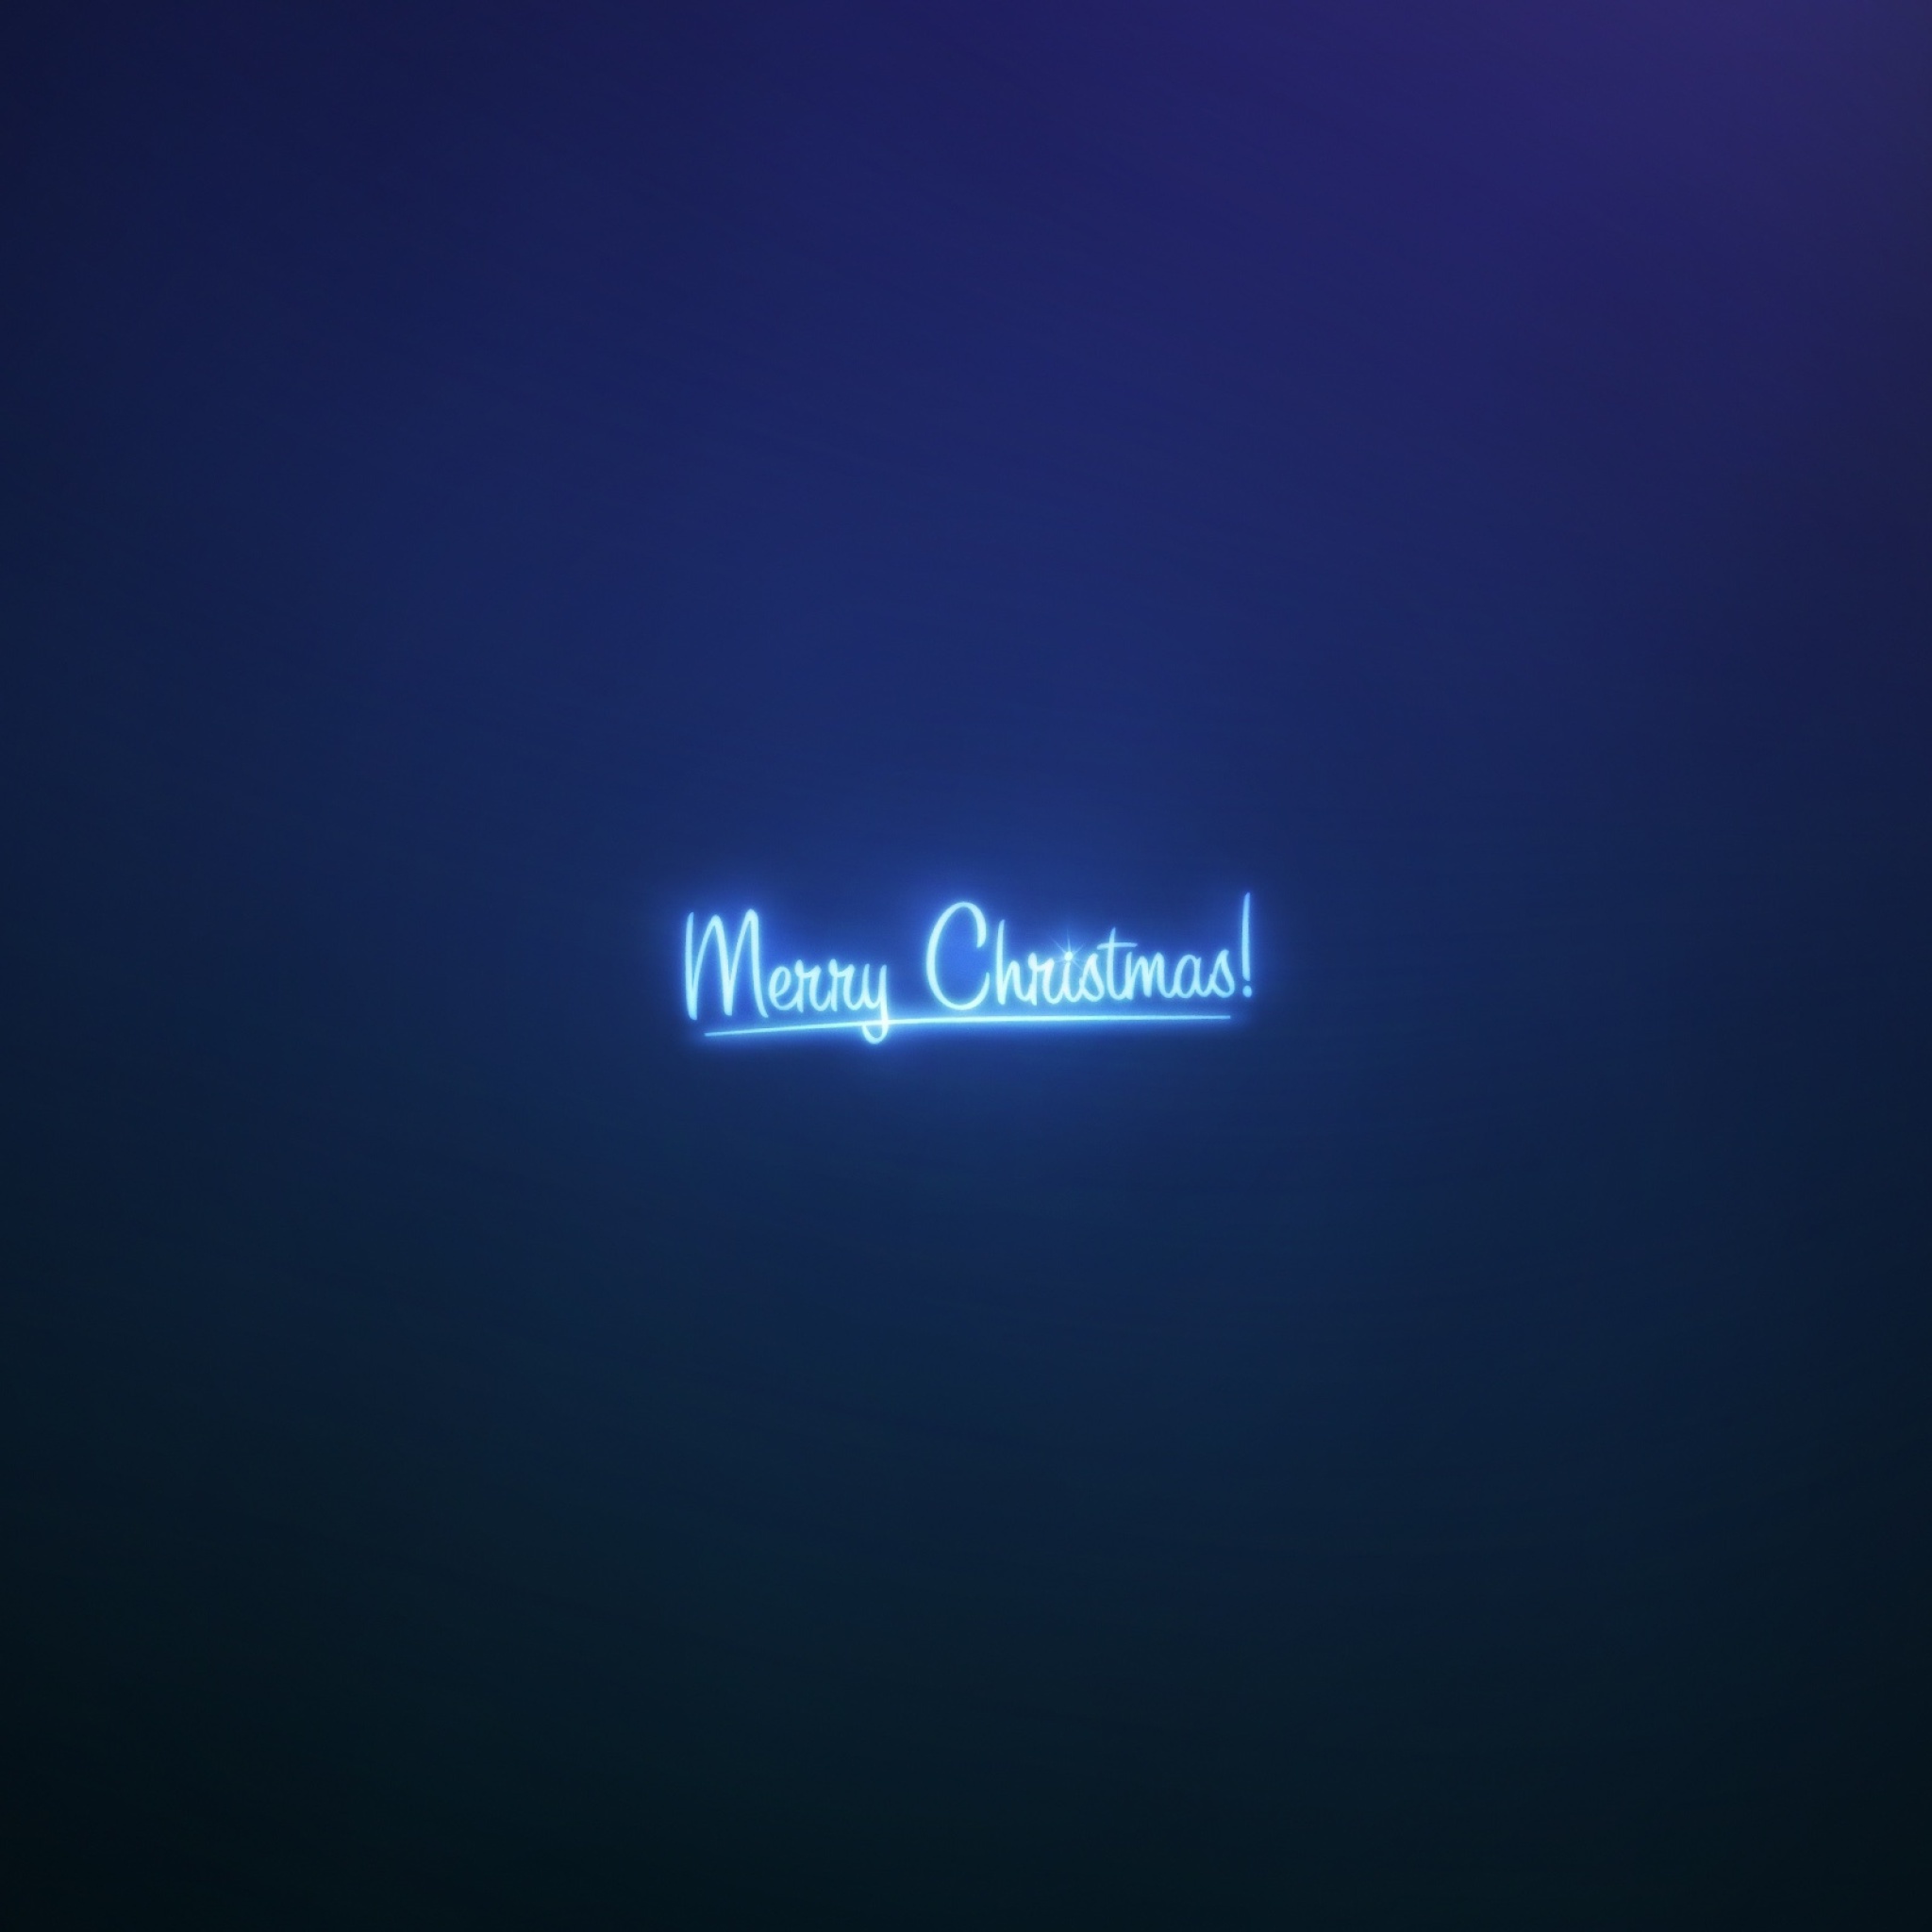 We Wish You a Merry Christmas wallpaper 2048x2048